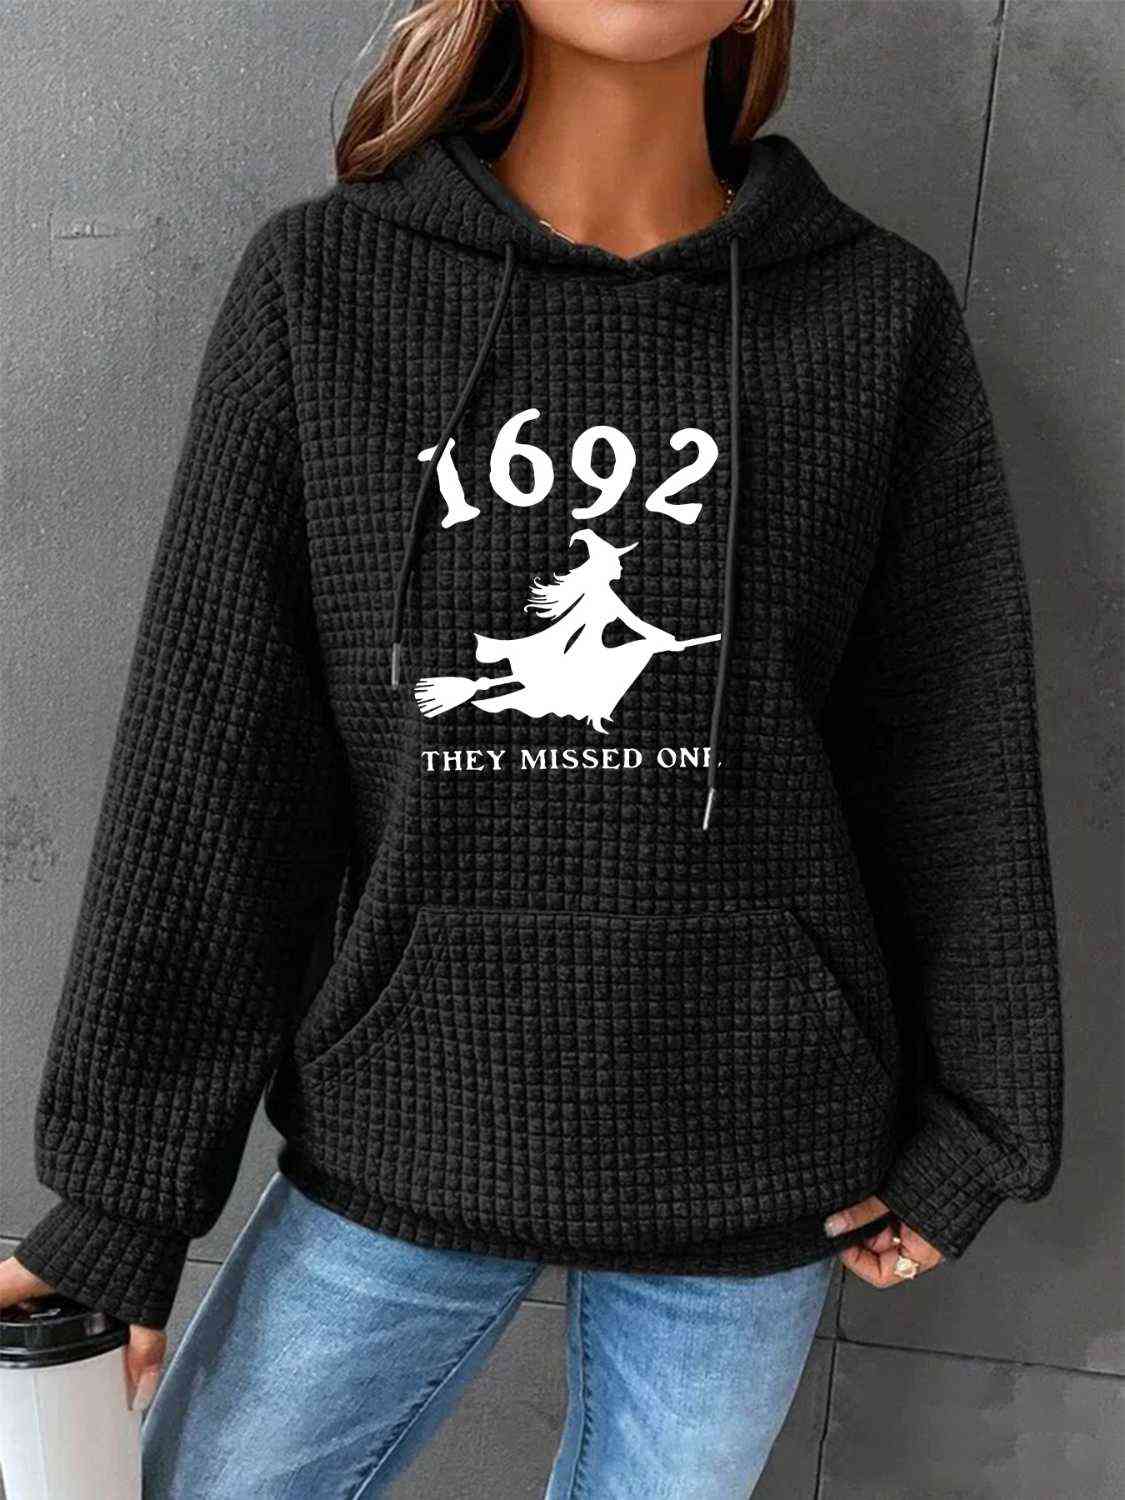 1962 THEY MISSED ONE Graphic Hoodie with Front Pocket - GemThreads Boutique